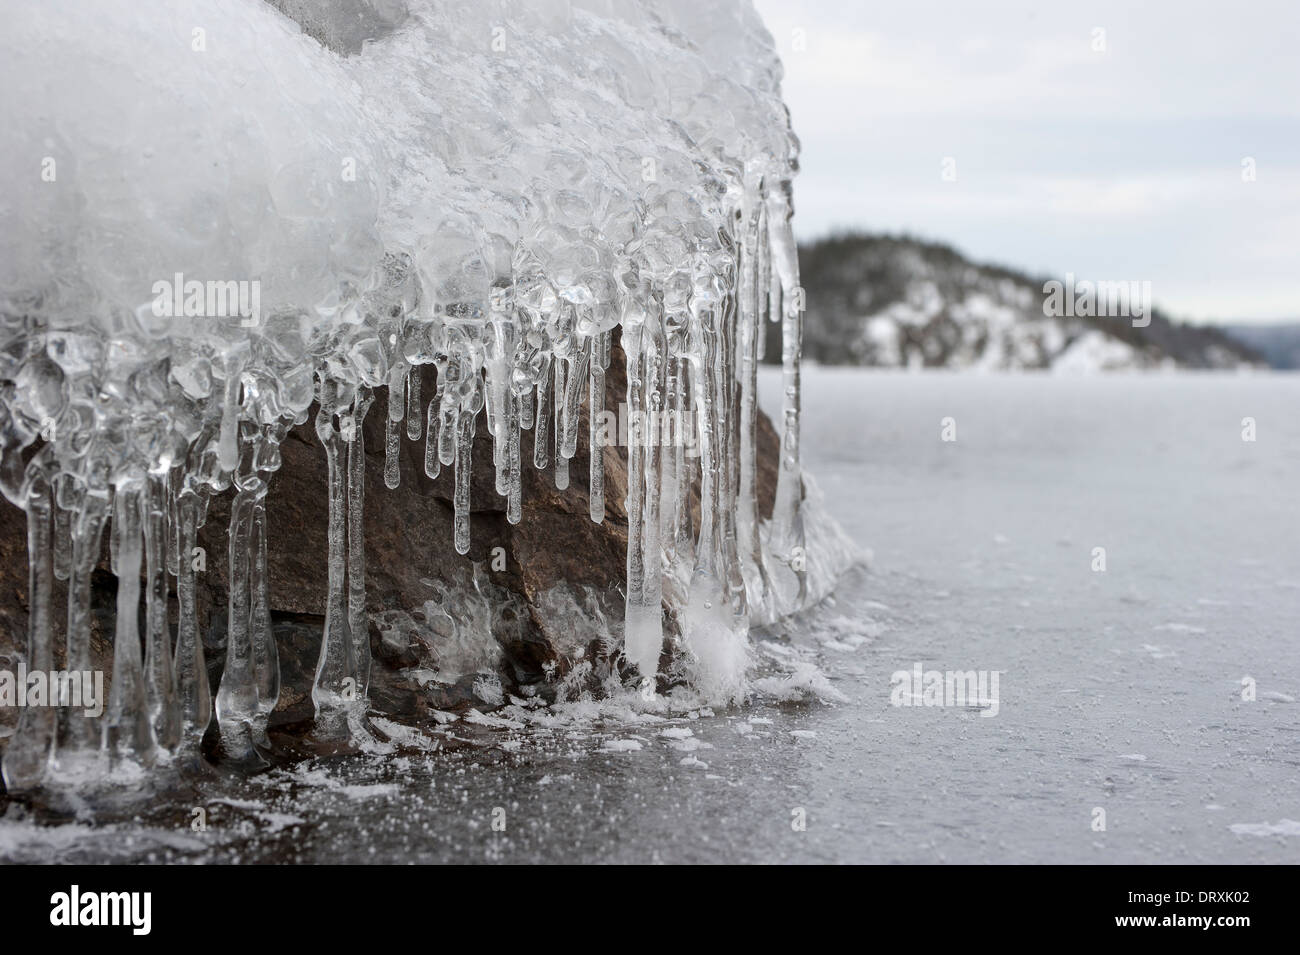 Ice melting off a rock at a lakeshore in winter. Stock Photo